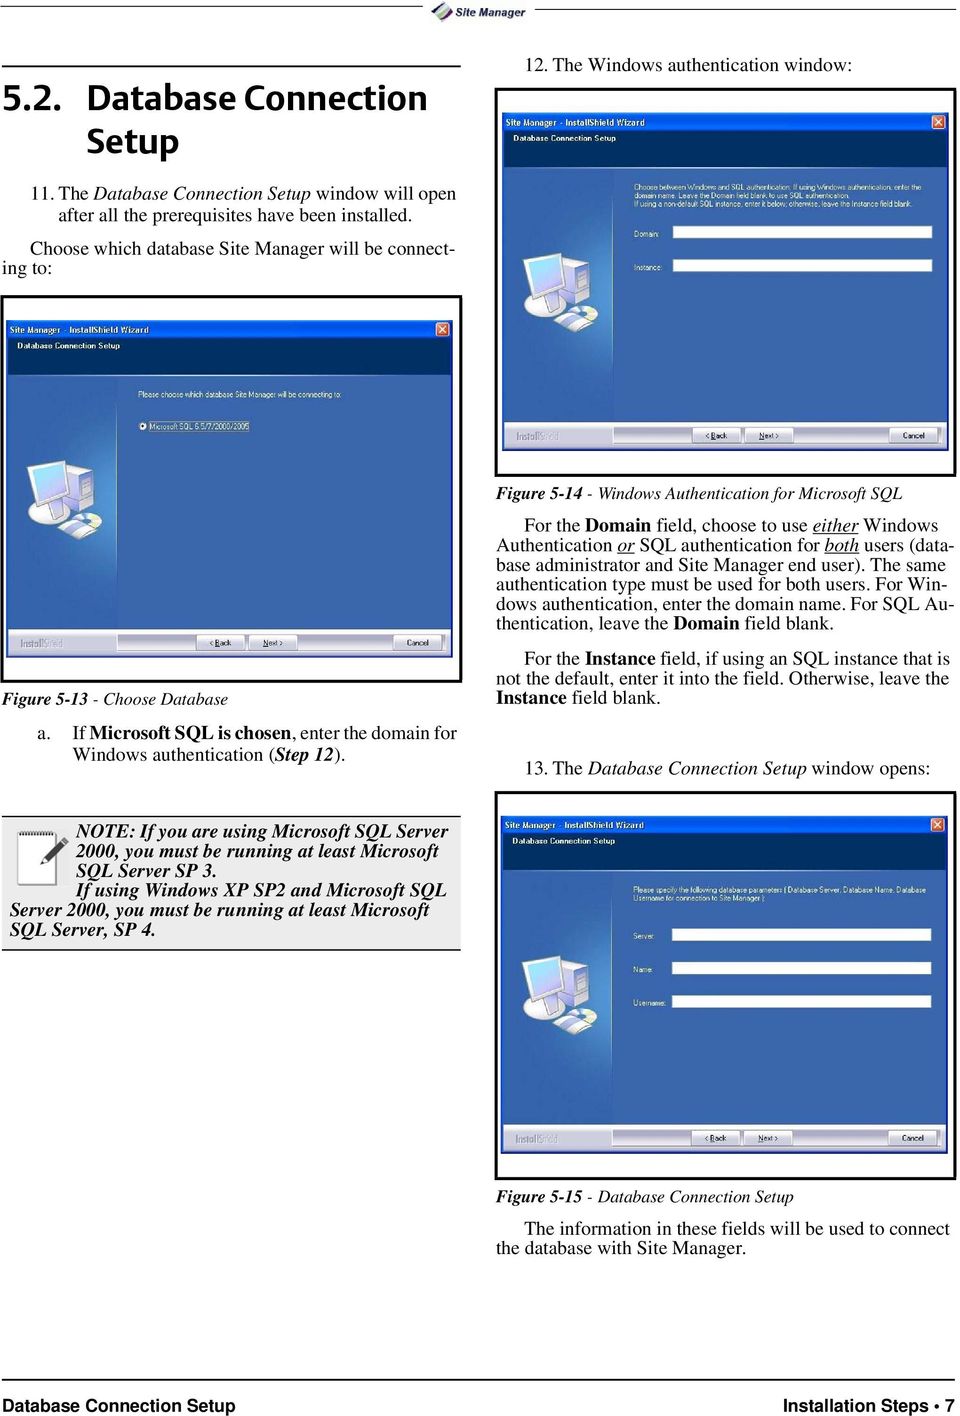 Figure 5-14 - Windows Authentication for Microsoft SQL For the Domain field, choose to use either Windows Authentication or SQL authentication for both users (database administrator and Site Manager